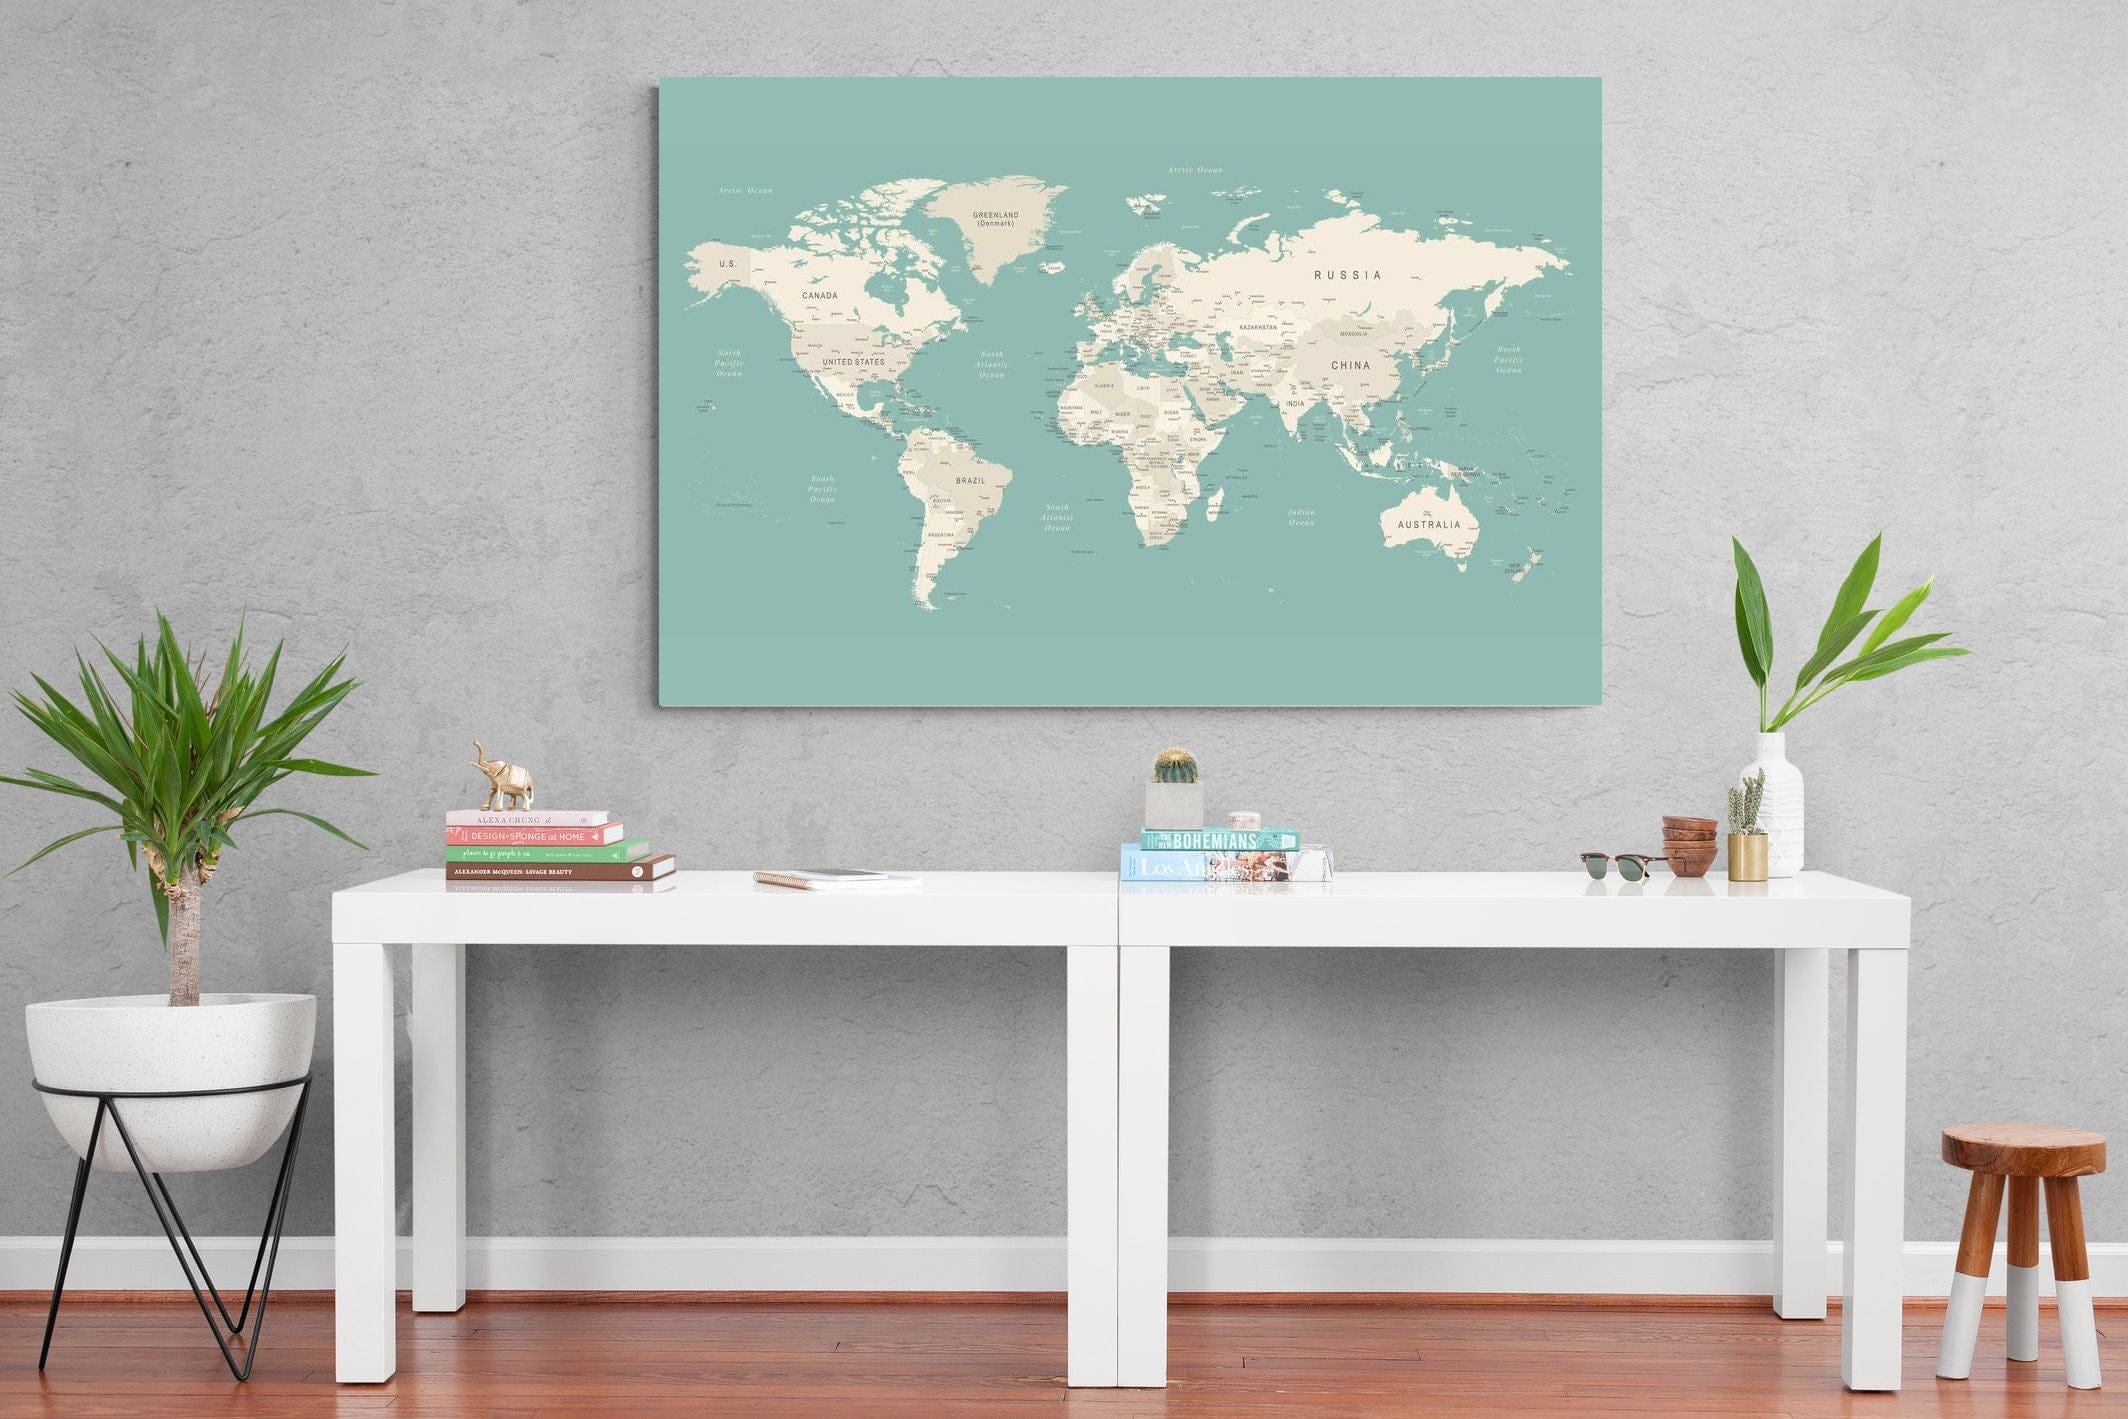 Amazon.com: Wood World Maps for Wall Office Wall Decor Home Decor Wall  Sticker with Wall Clock Living Room Decor Home Gifts : Tools & Home  Improvement